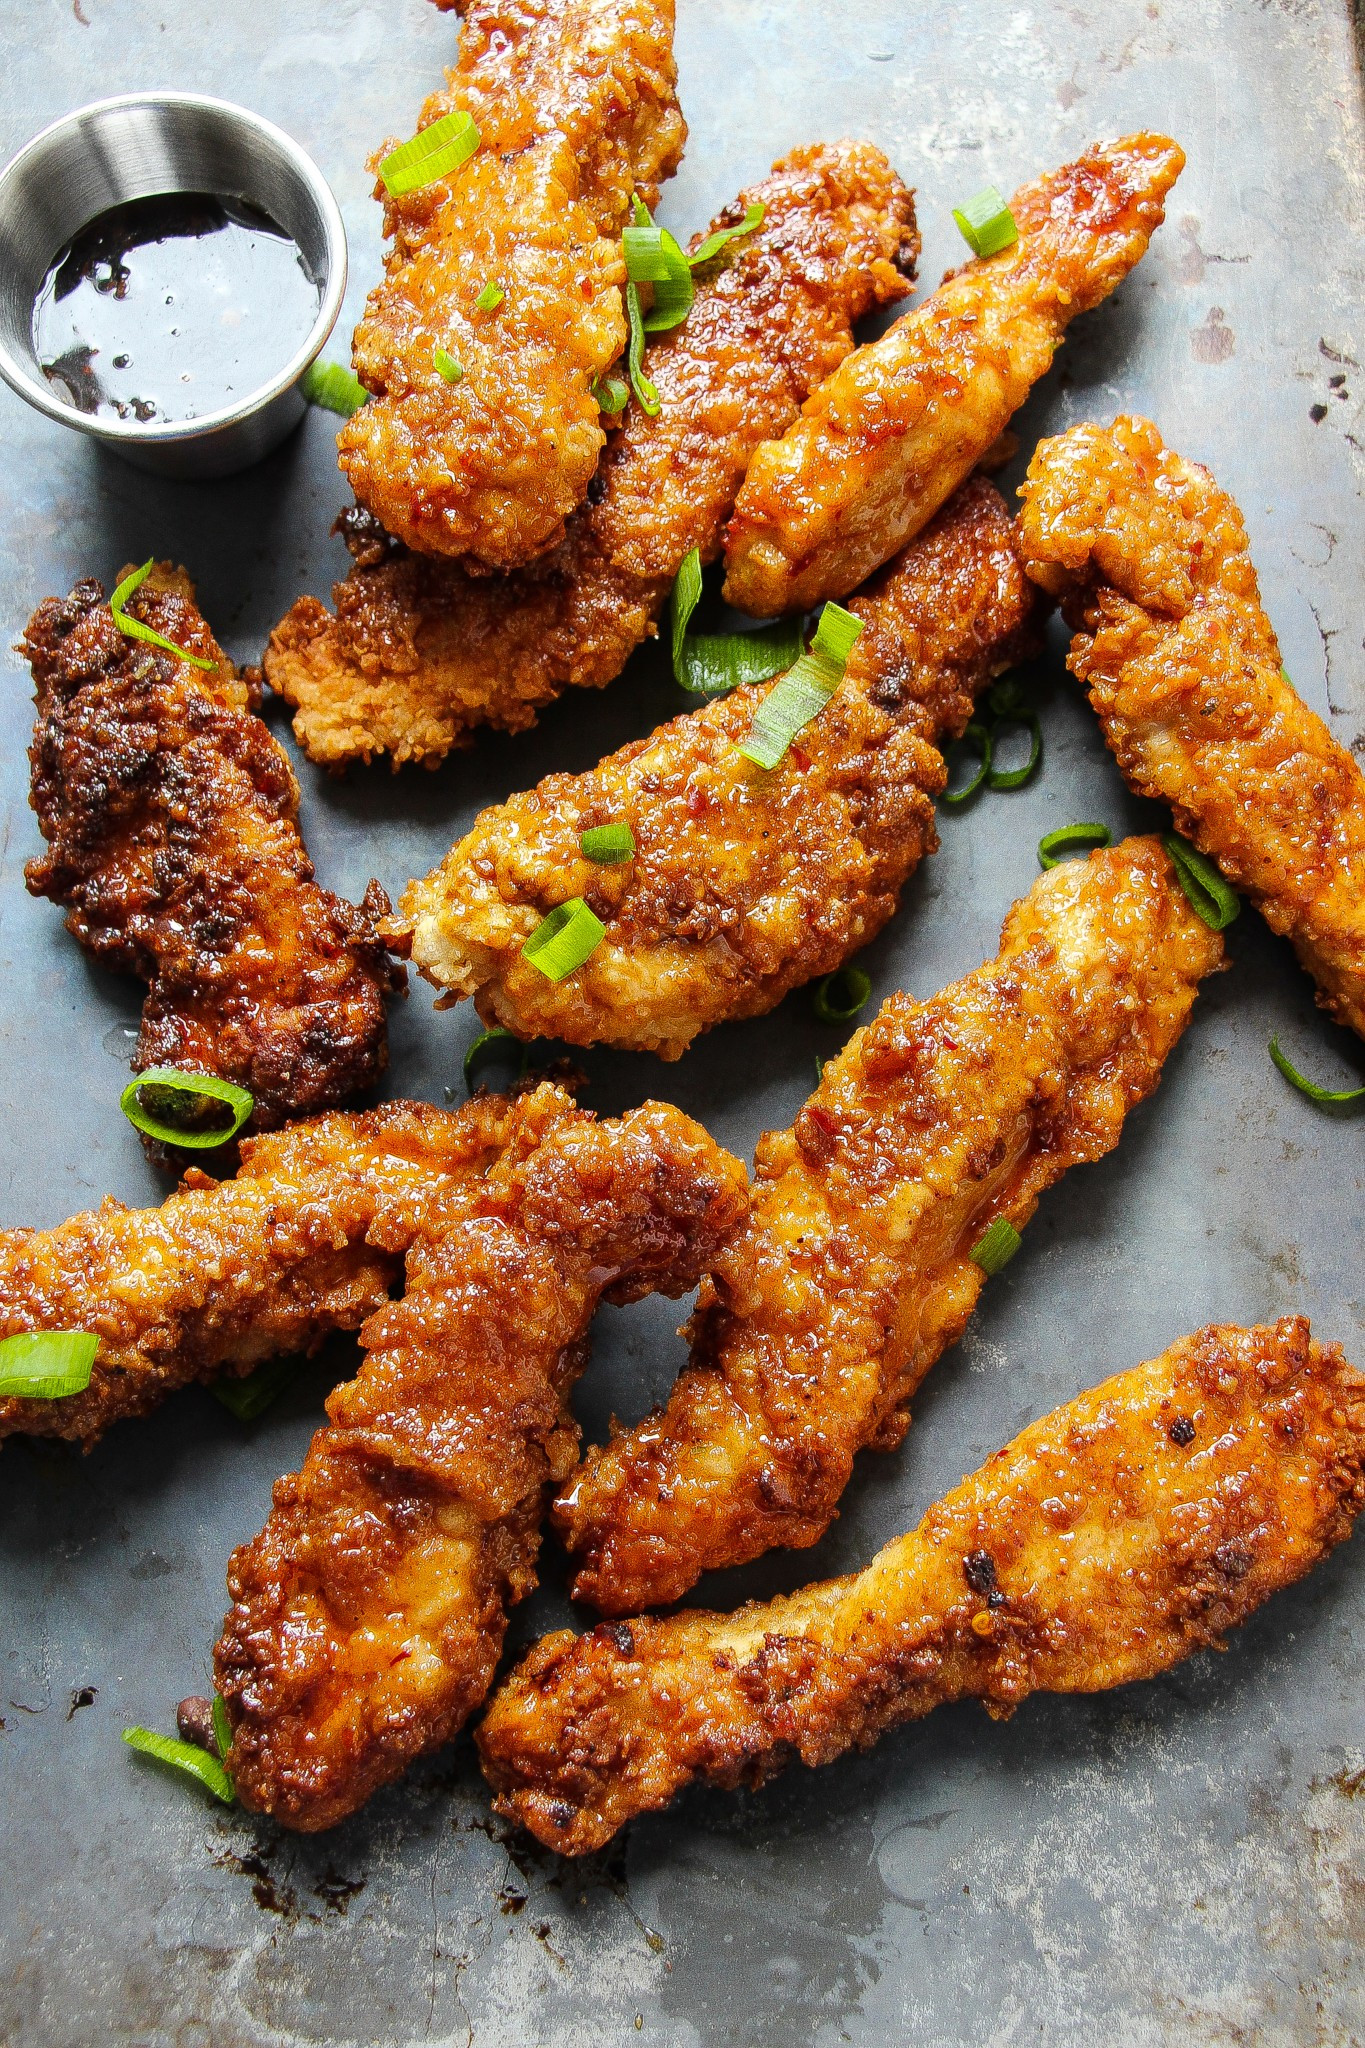 How To Make Chicken Tenders
 Spicy Brown Sugar Glazed Fried Chicken Strips Layers of